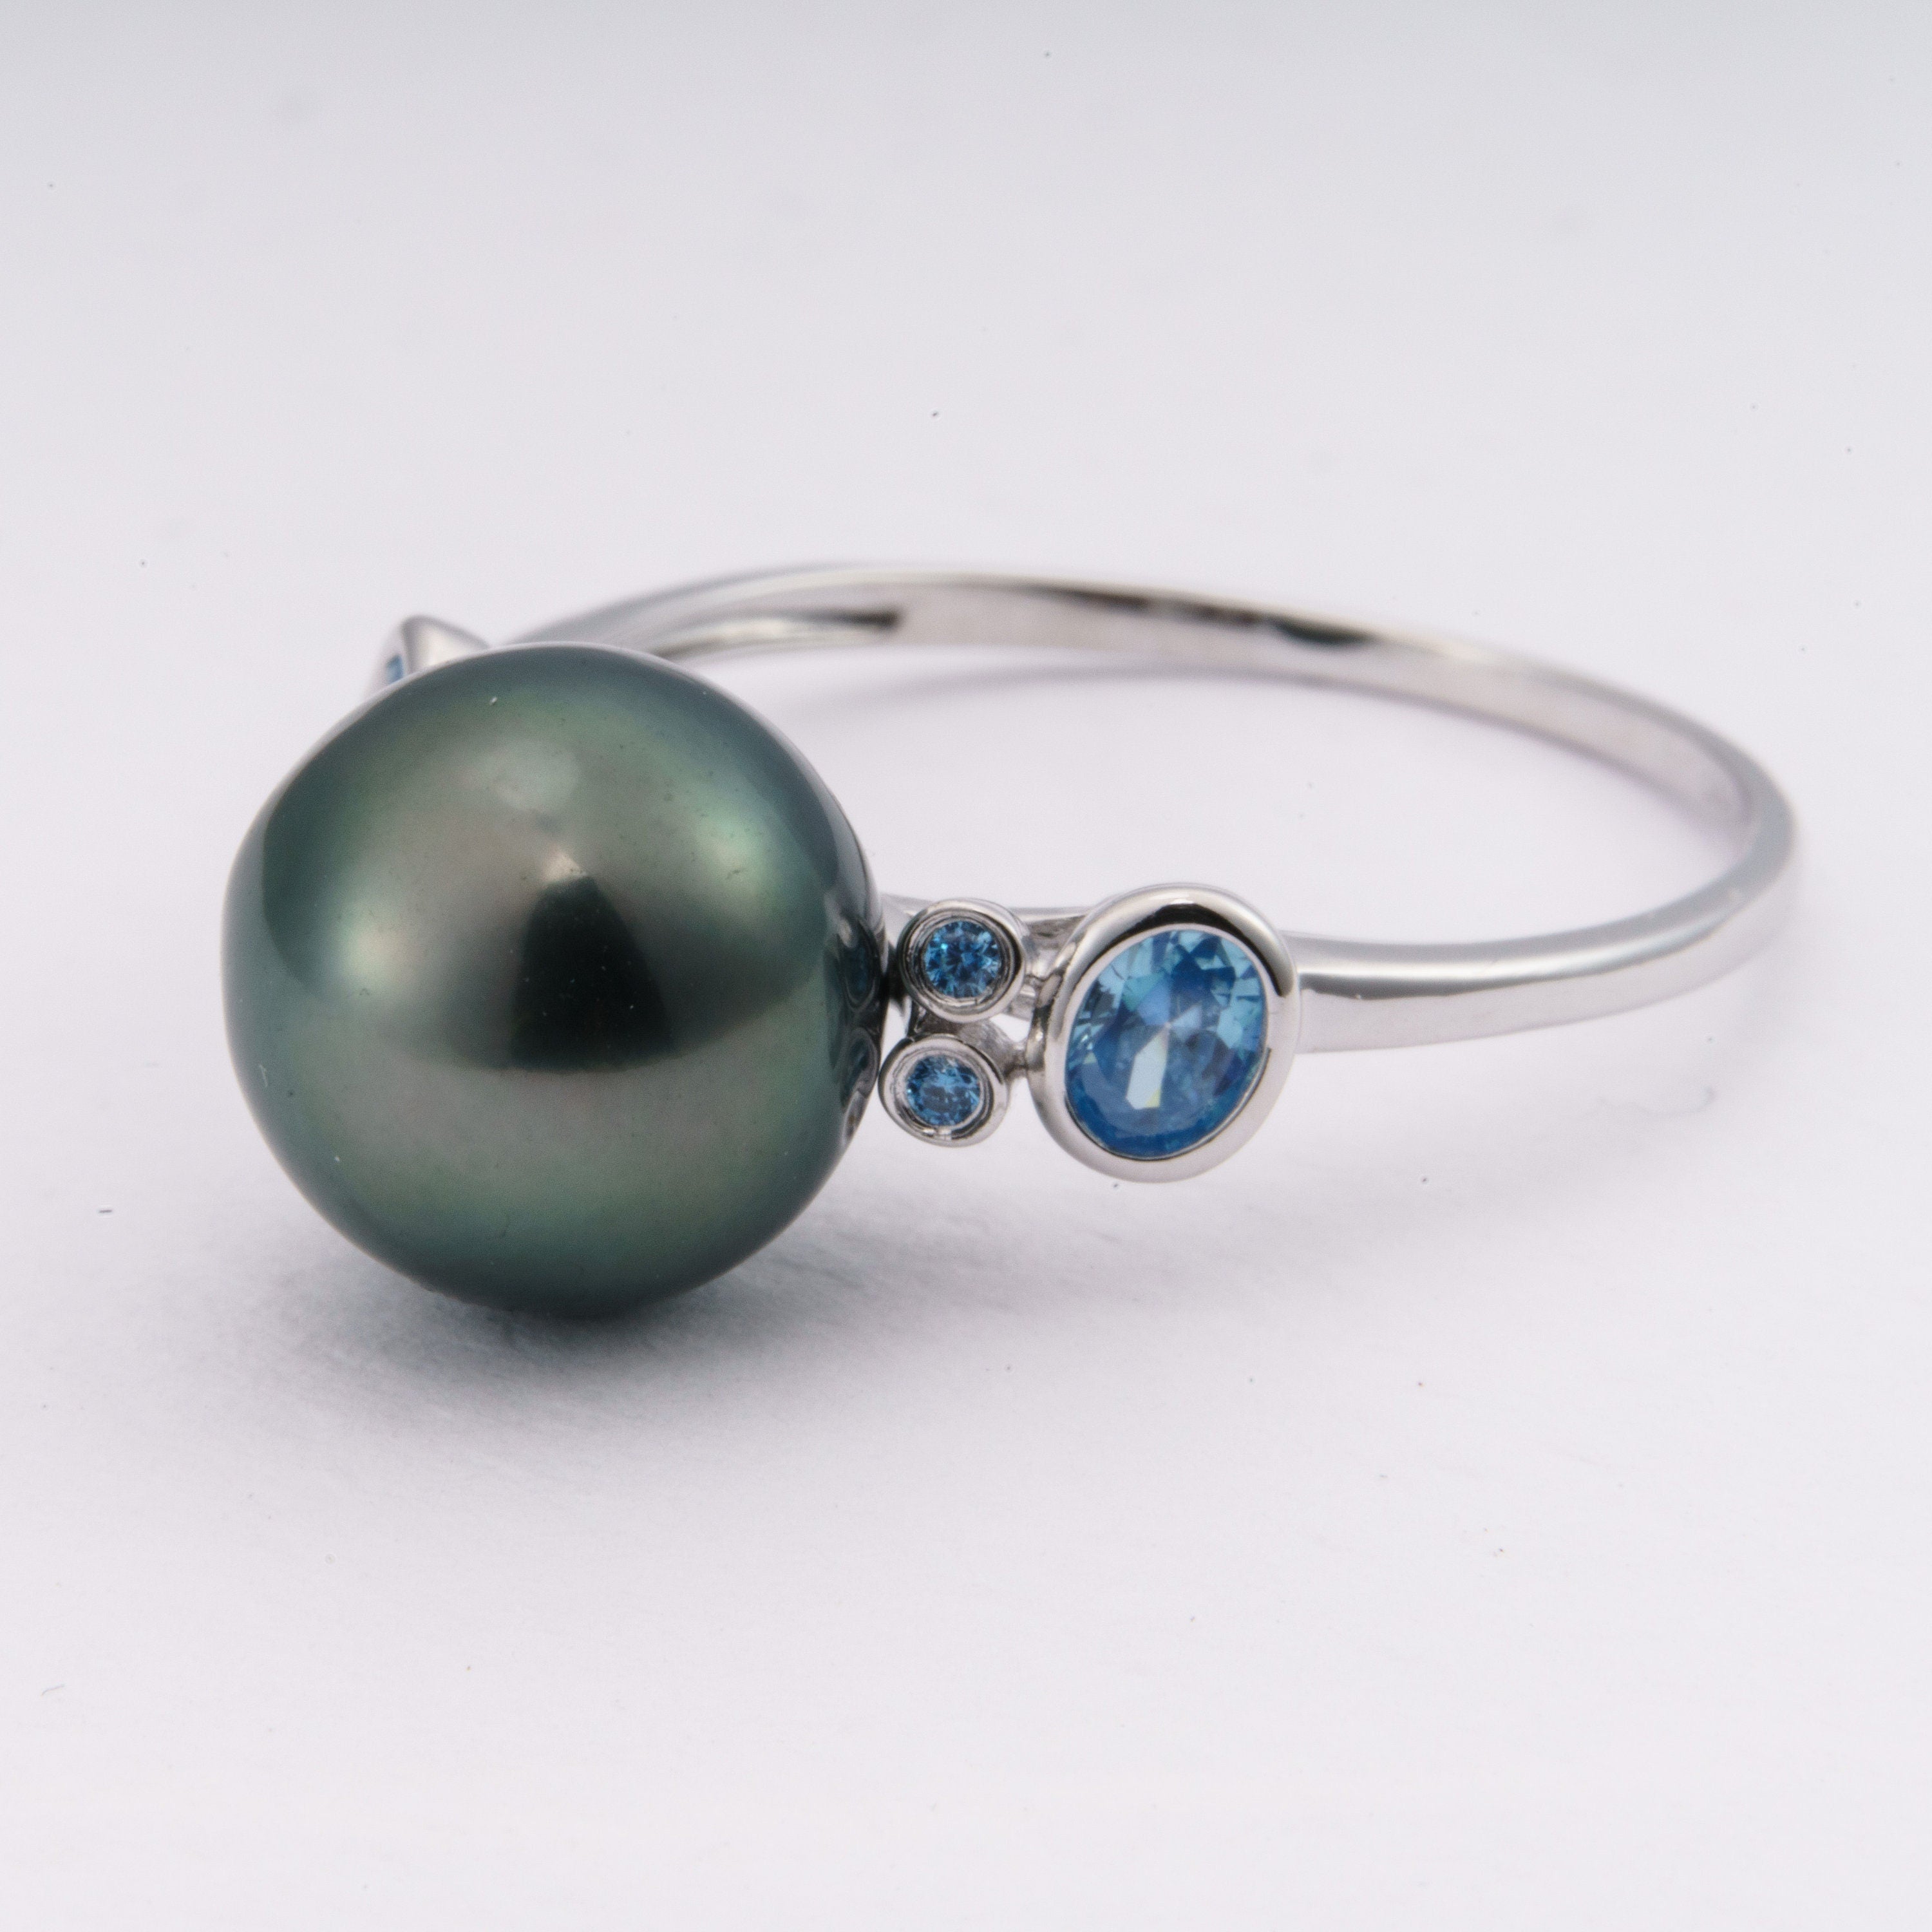 11mm tahitian pearl ring, size 9.5 us, 925 sterling silver with cubic zirconia